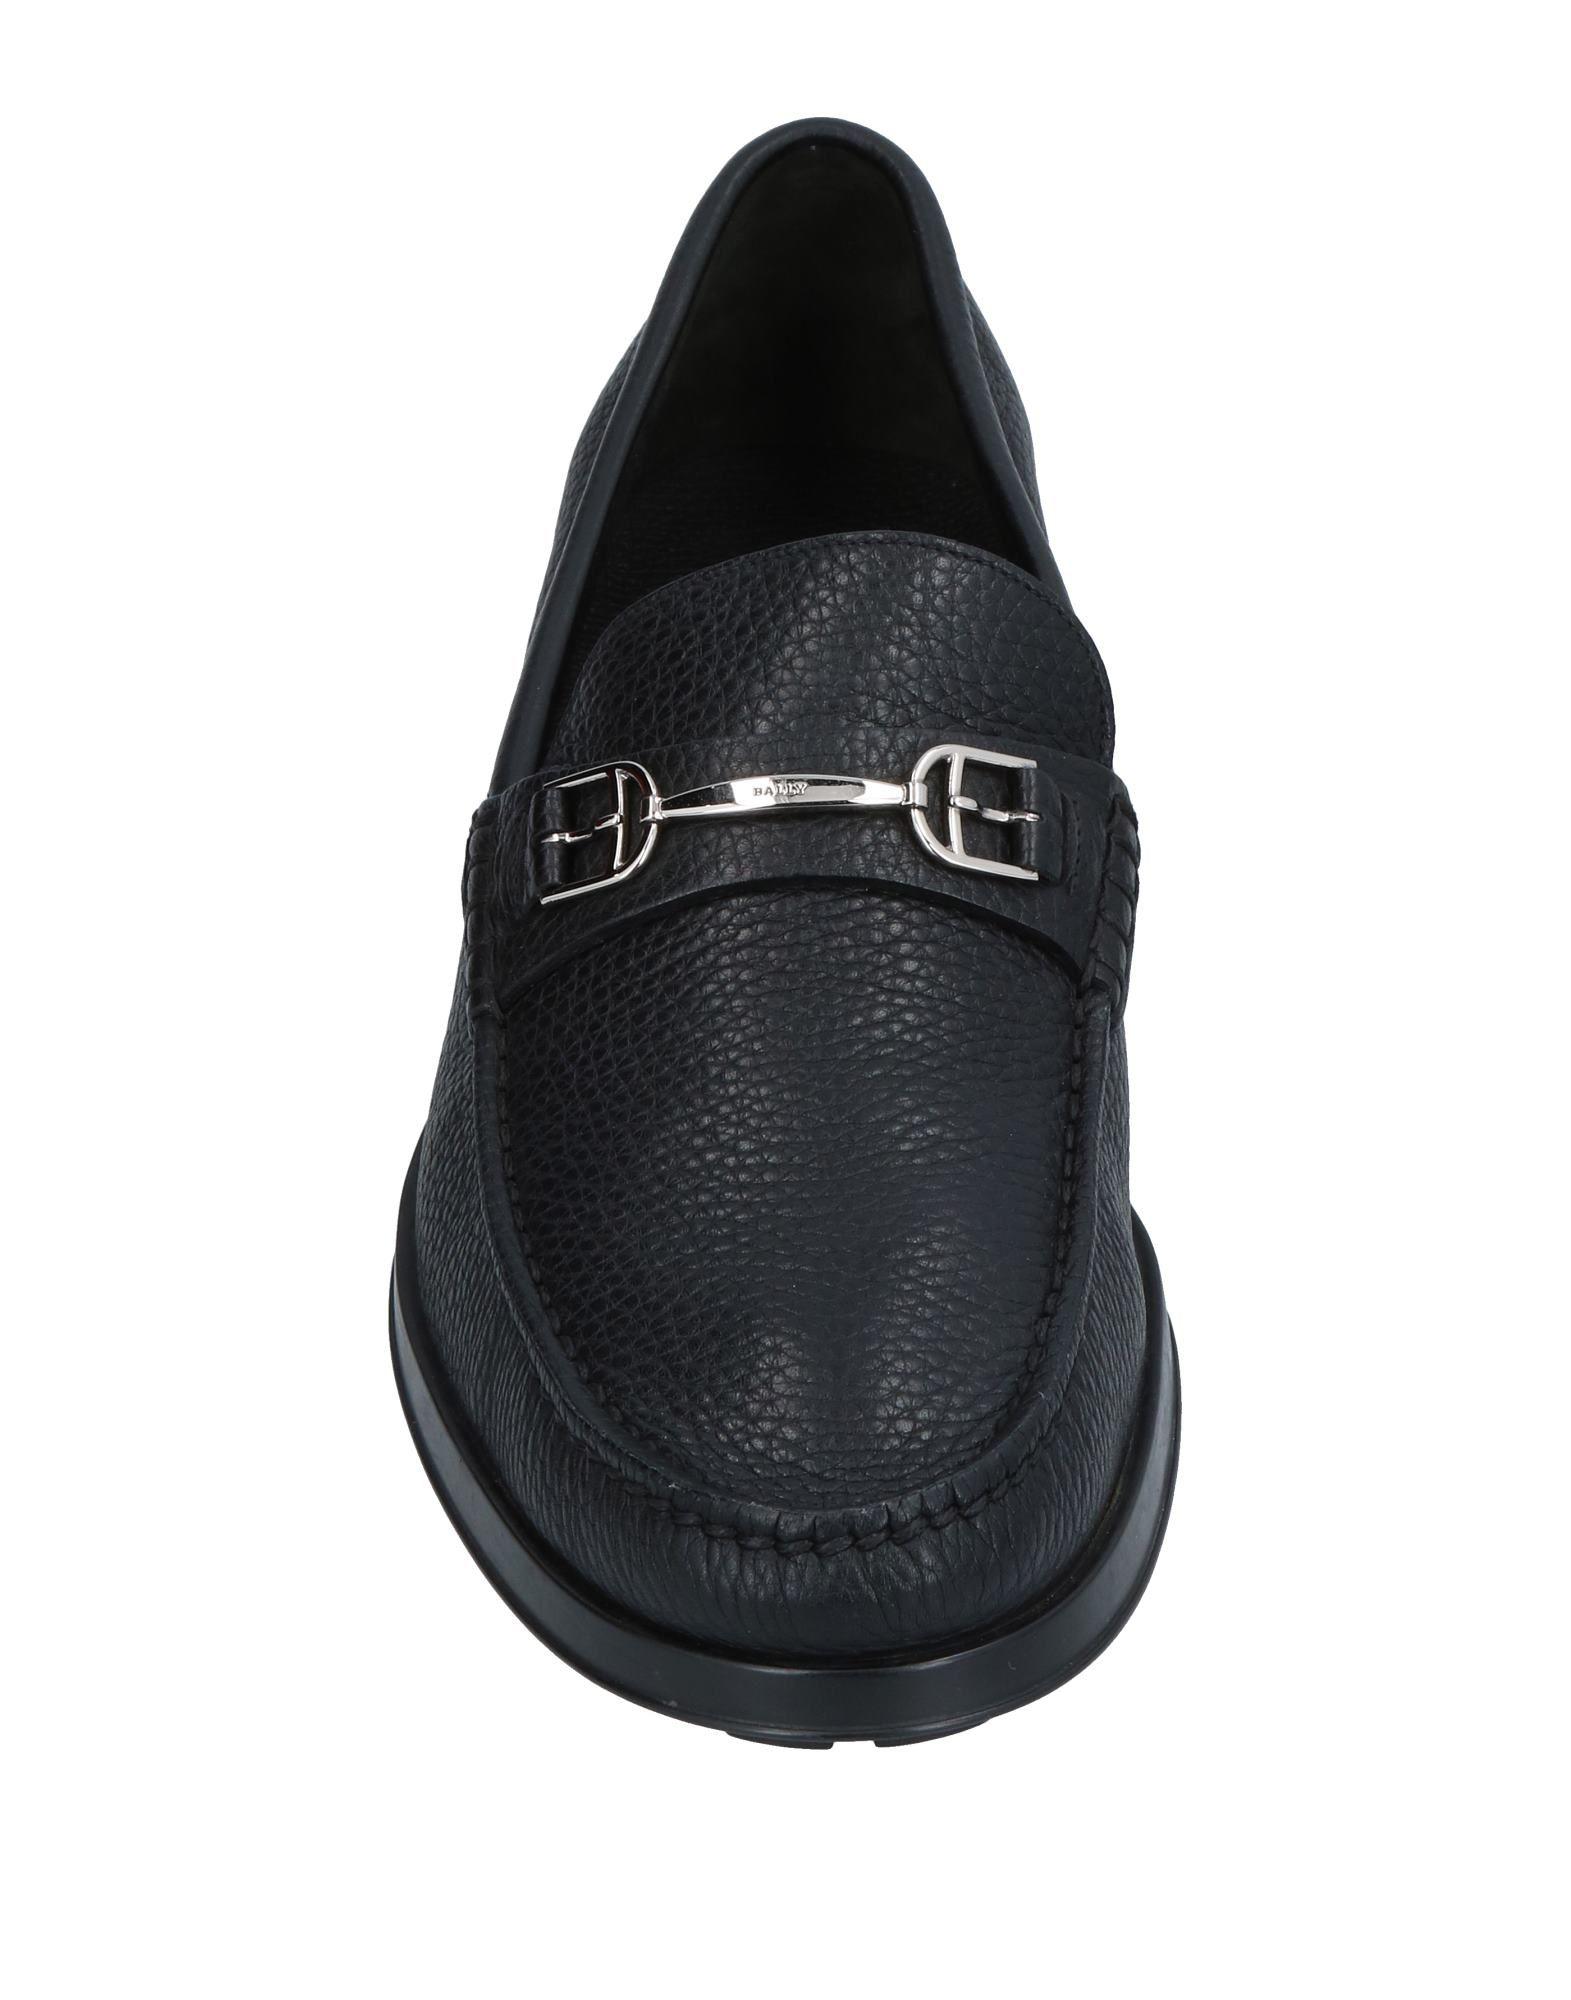 Bally Leather Loafer in Black for Men - Lyst